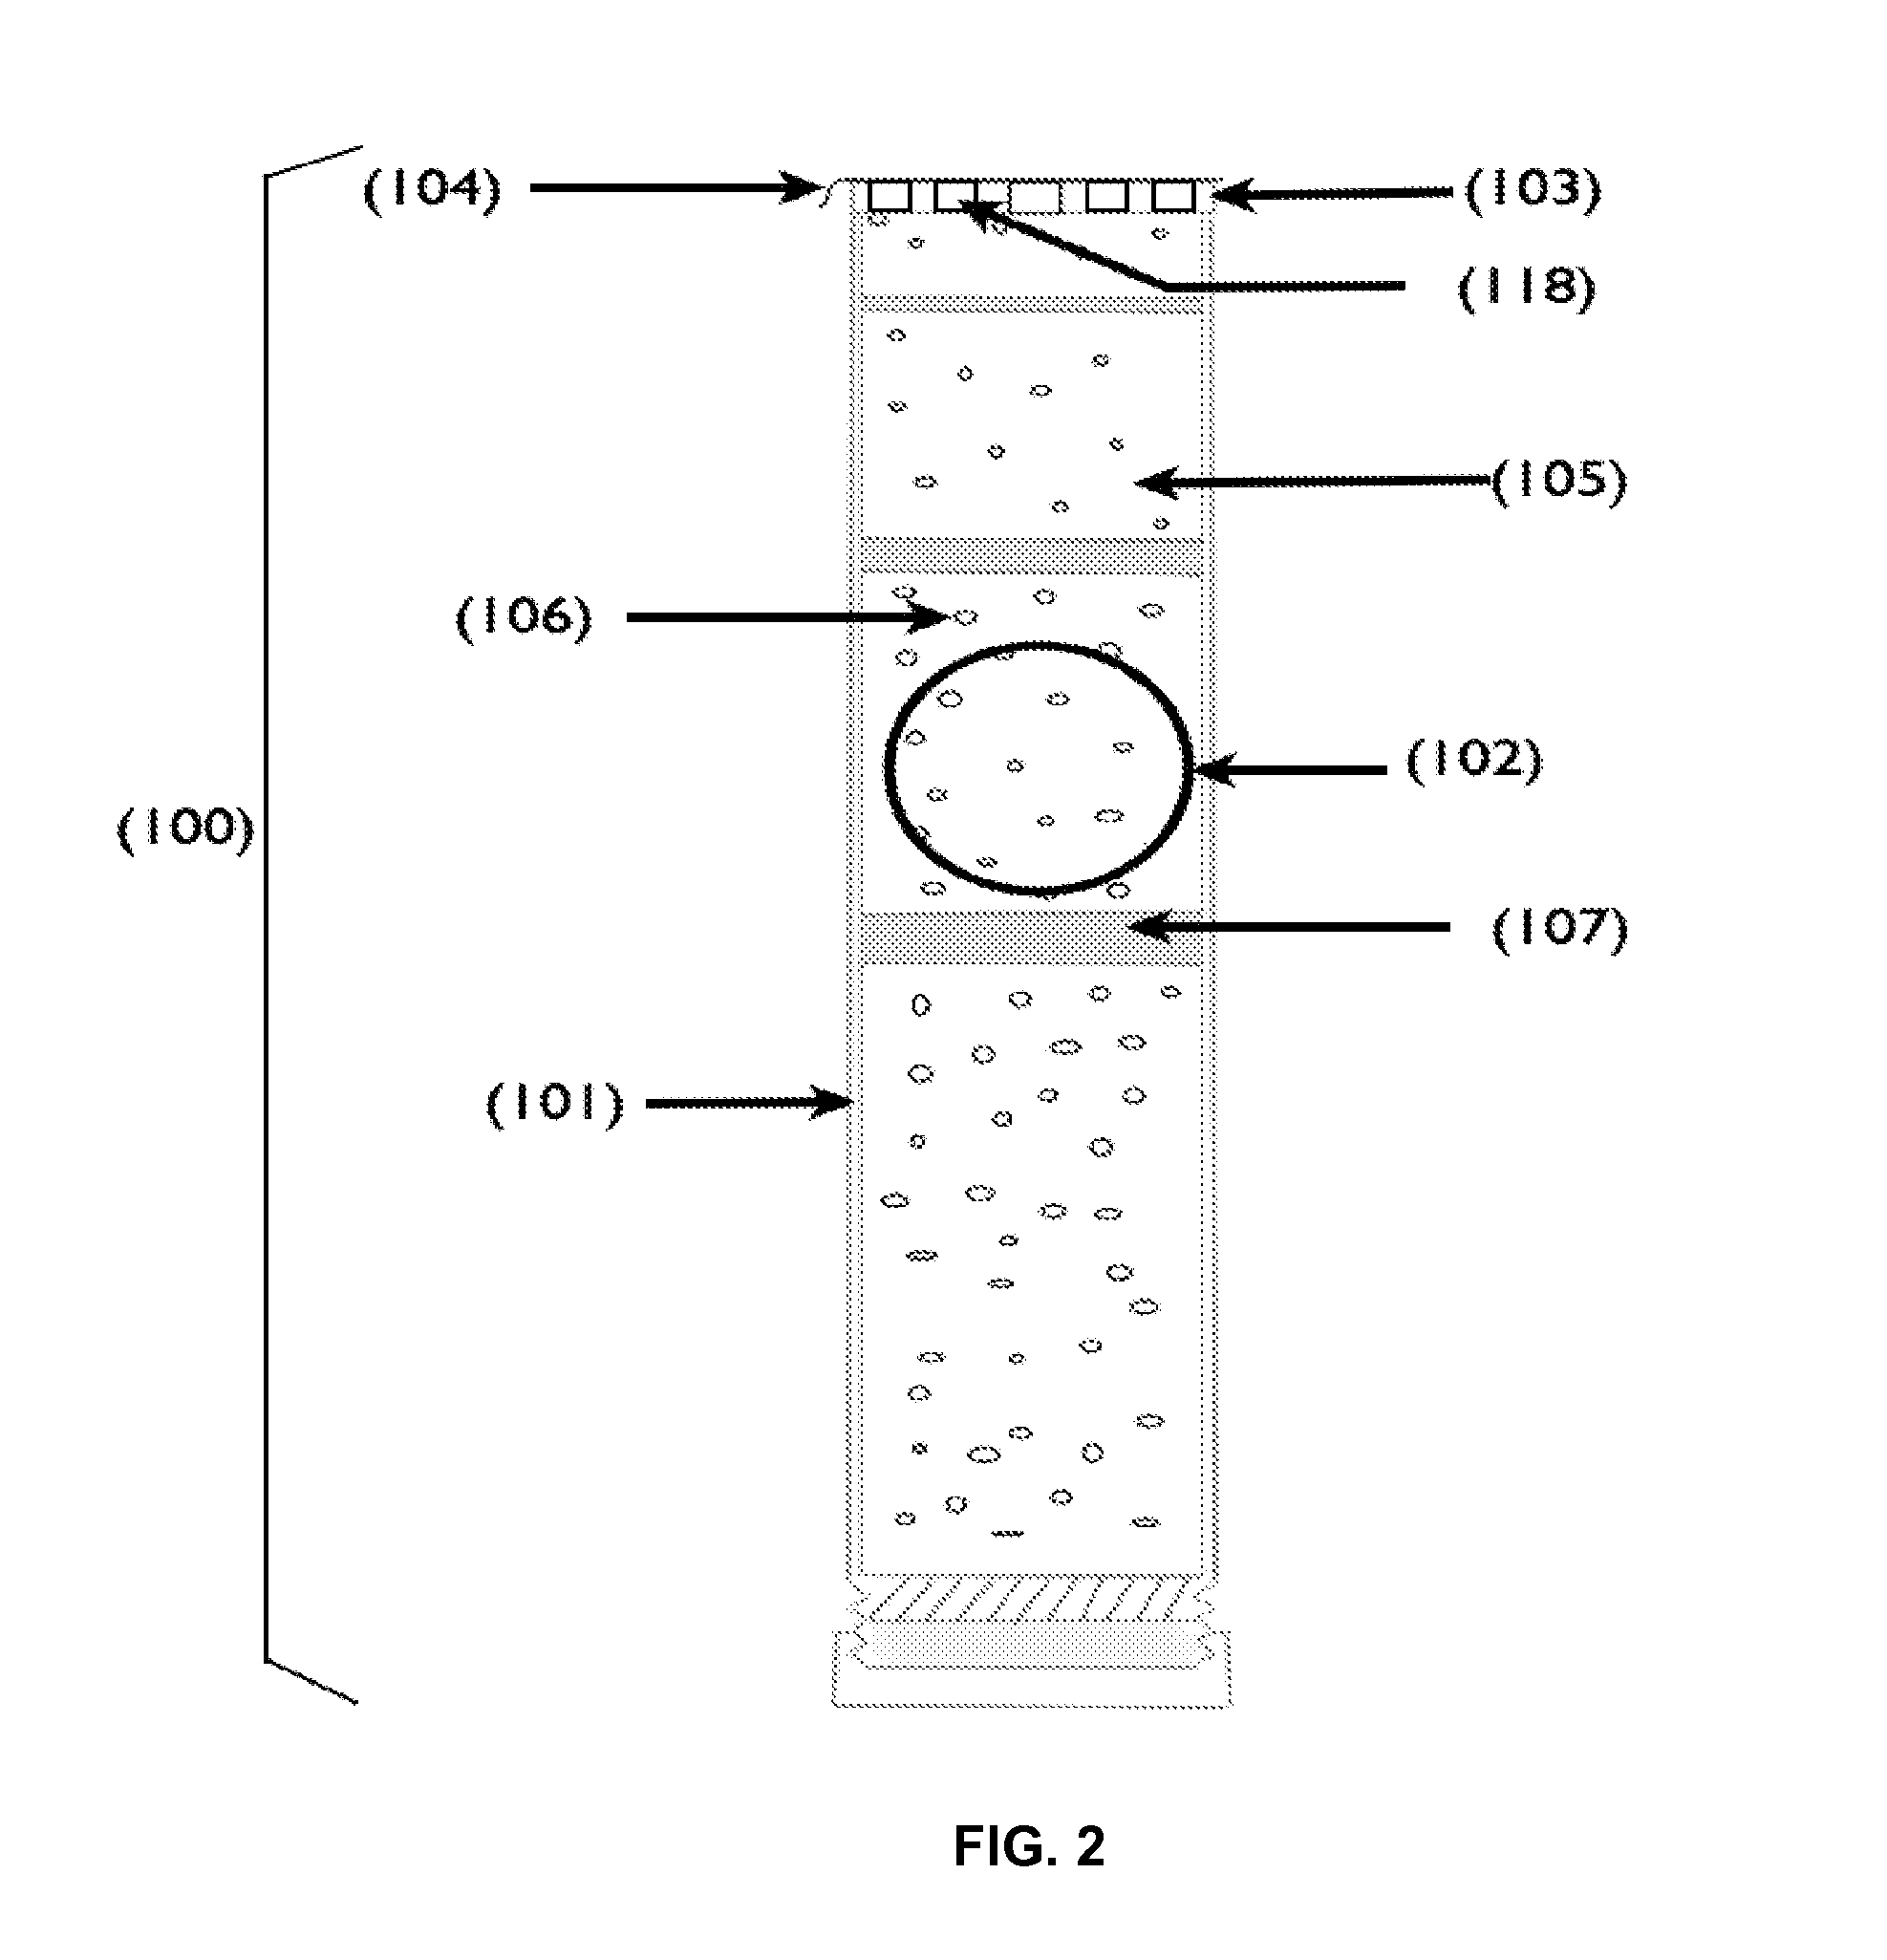 Apparatus and Method for Controlled Release of Botanical Fumigant Pesticides